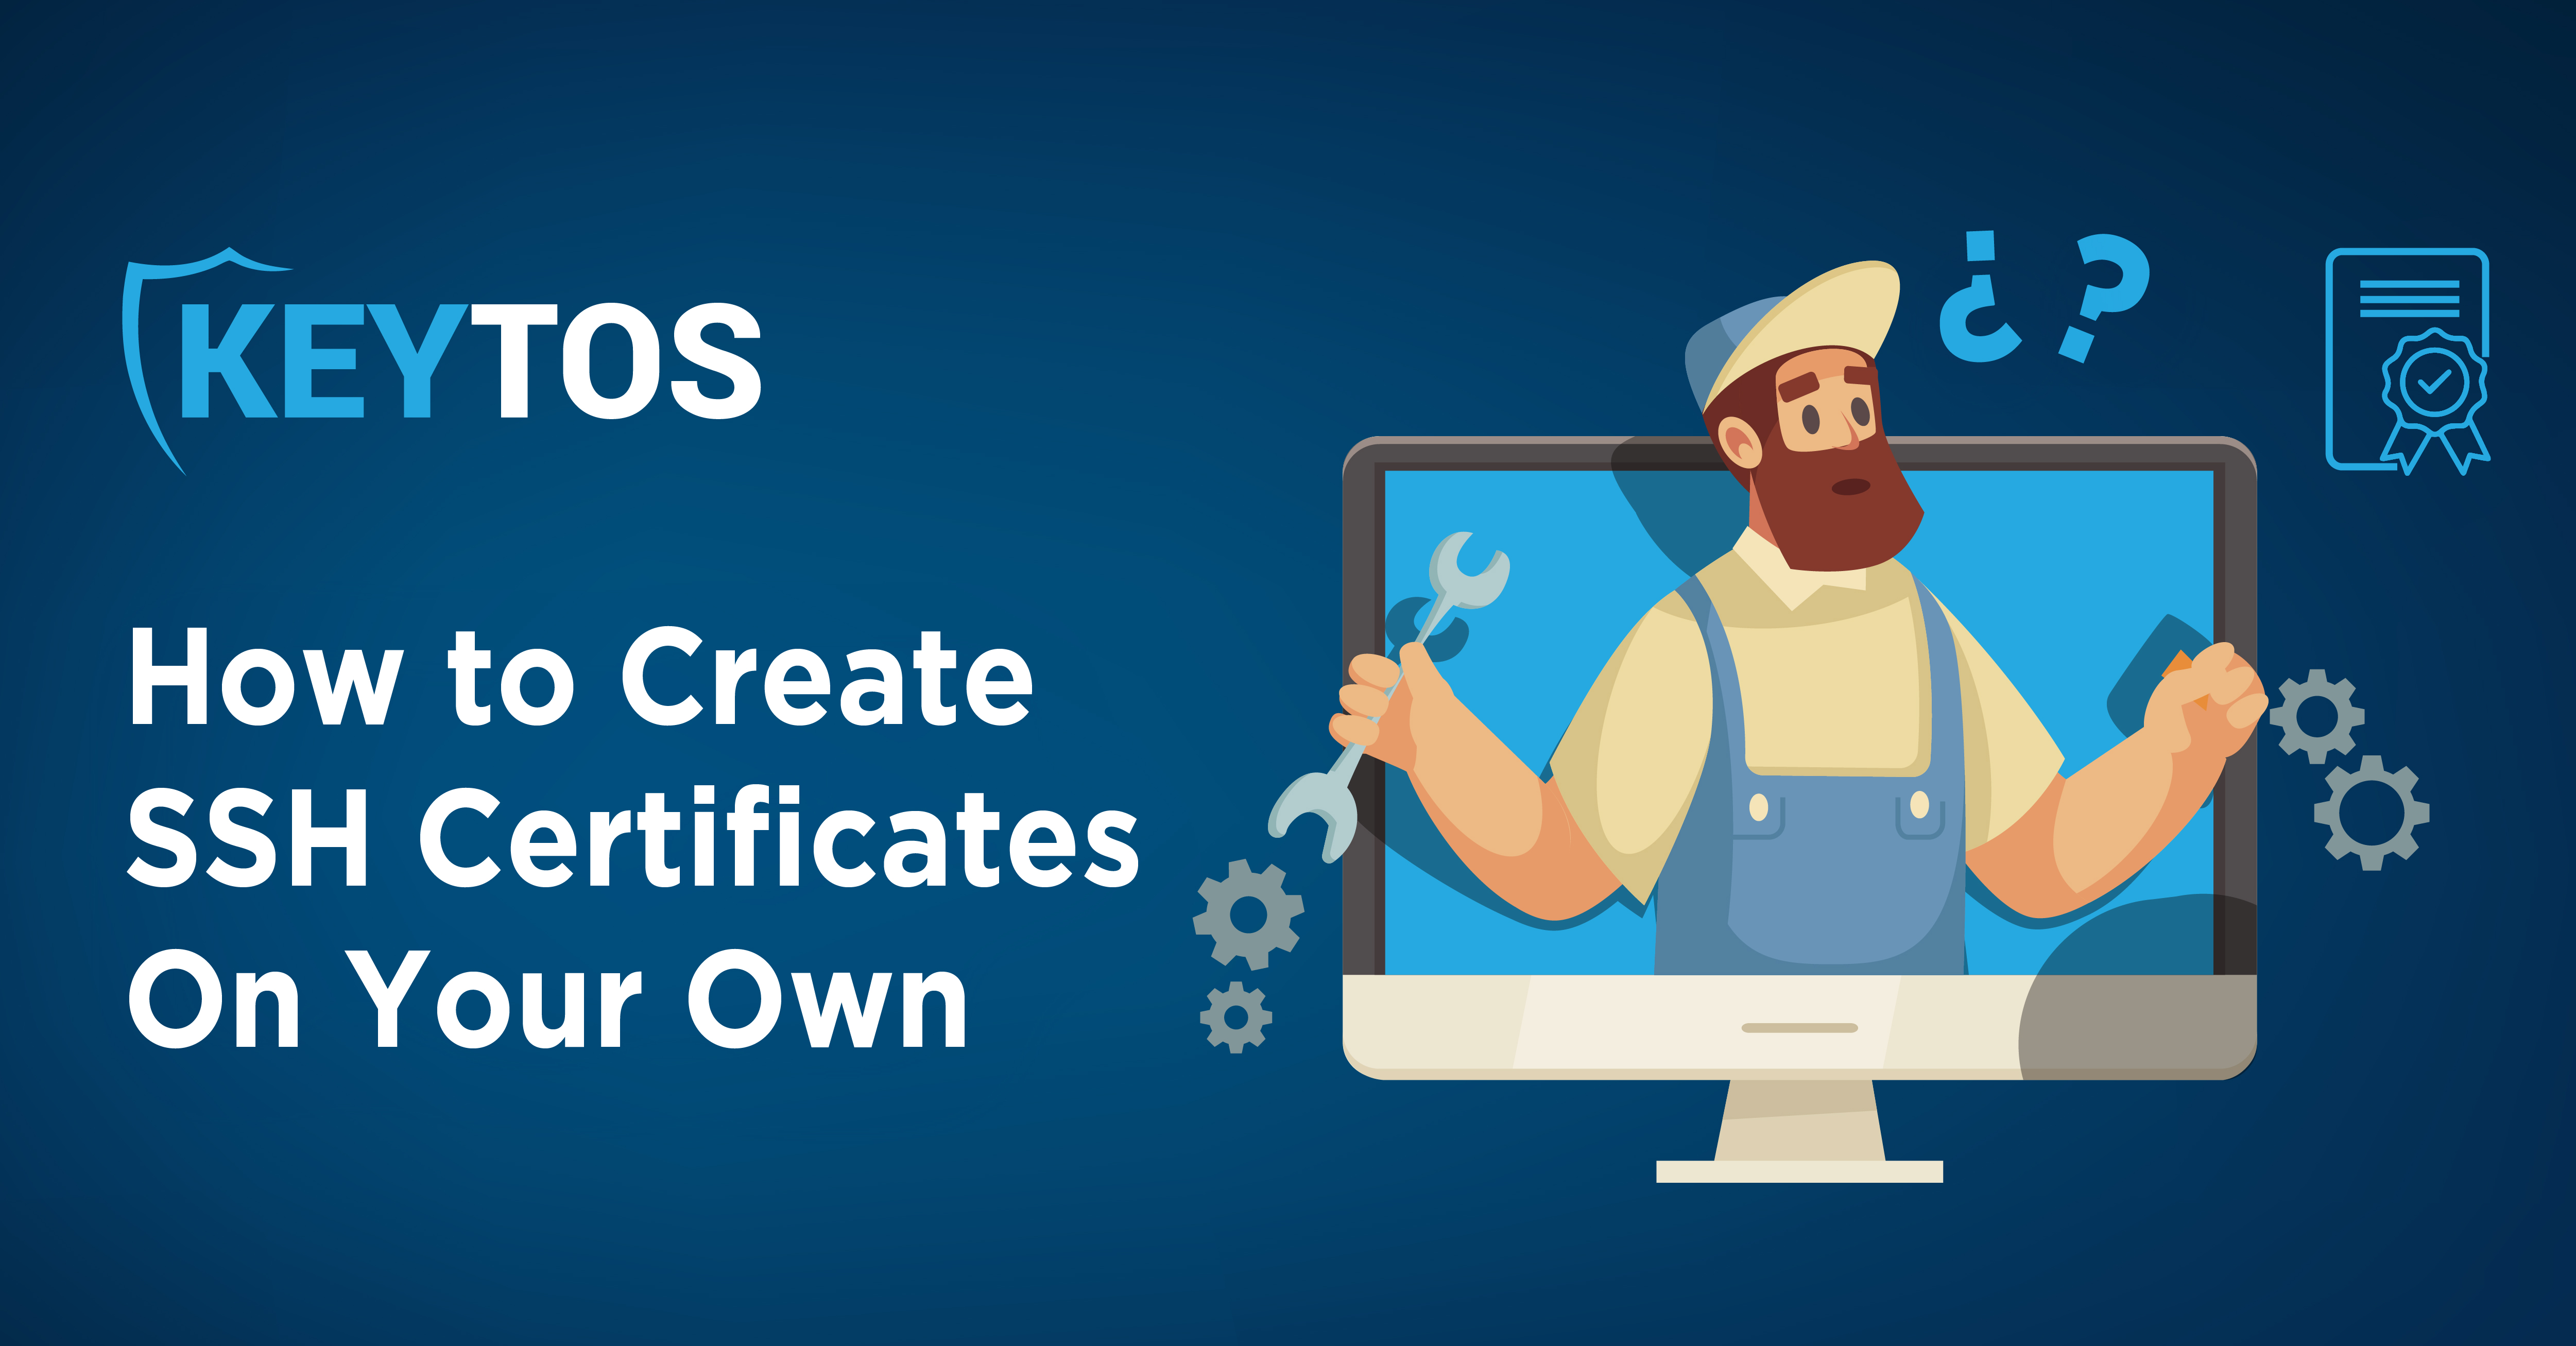 How to Create SSH Certificates On Your Own